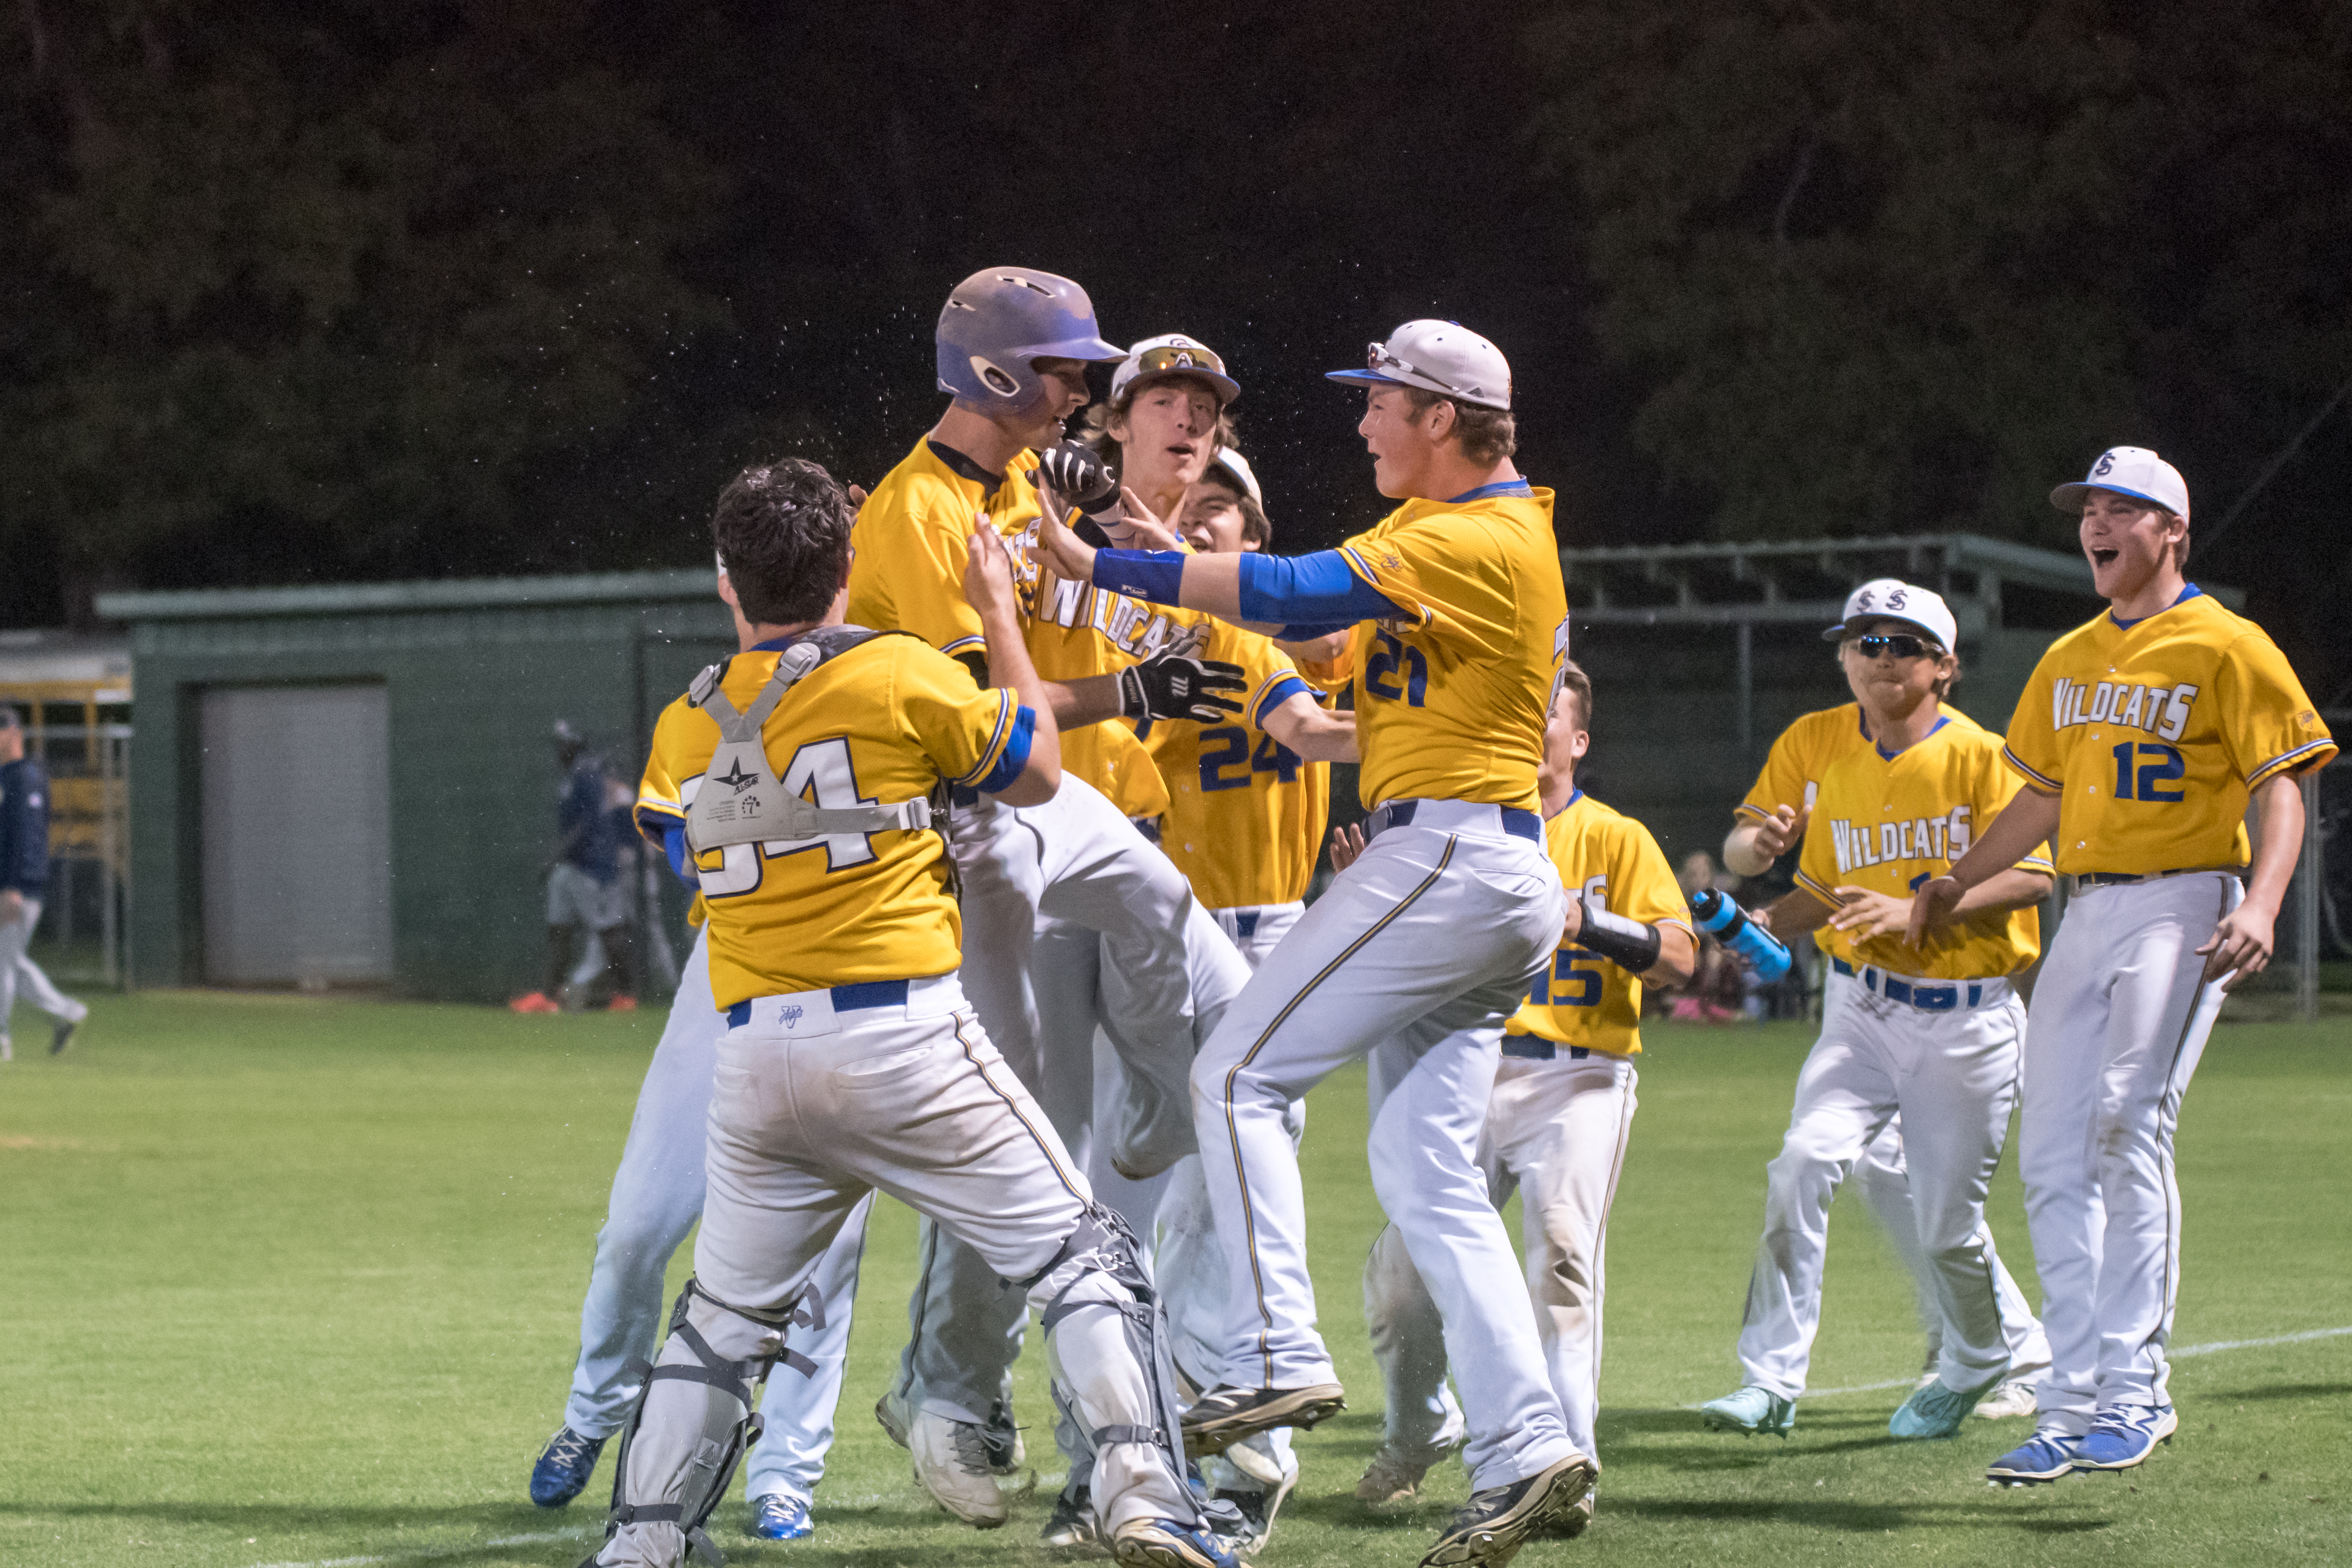 Photos from Wildcat Baseball’s Win over Pine Tree by Cathy Bryan